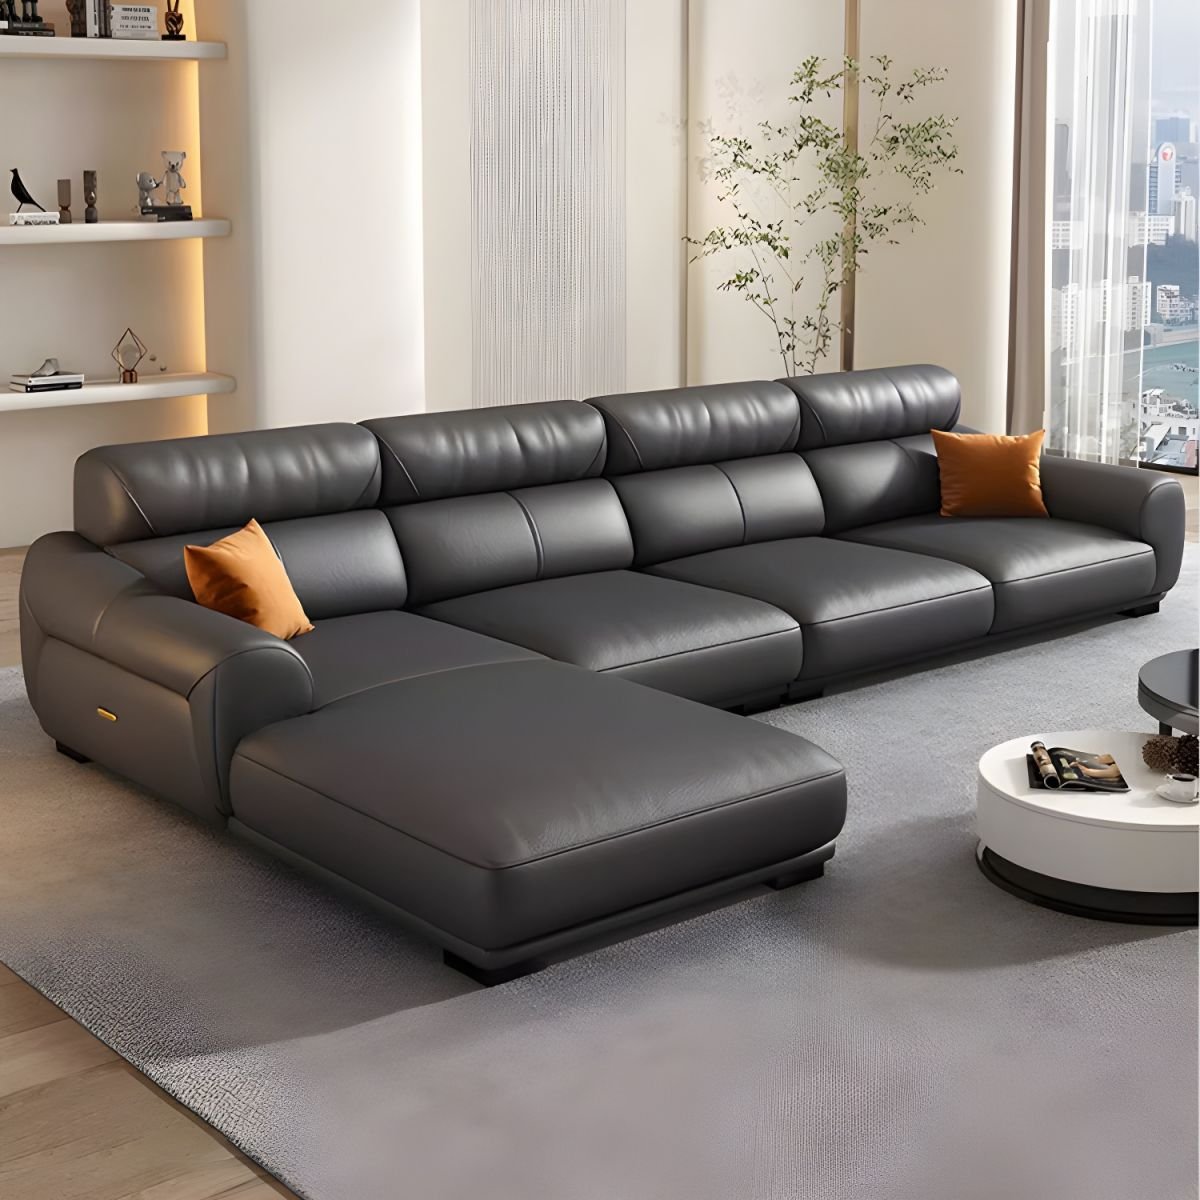 Innovative Modern Black Leather Sofa with Sloped Arms and Cushion Back - Full Grain Cow Leather Sponge 138"L x 70"W x 32"H Left